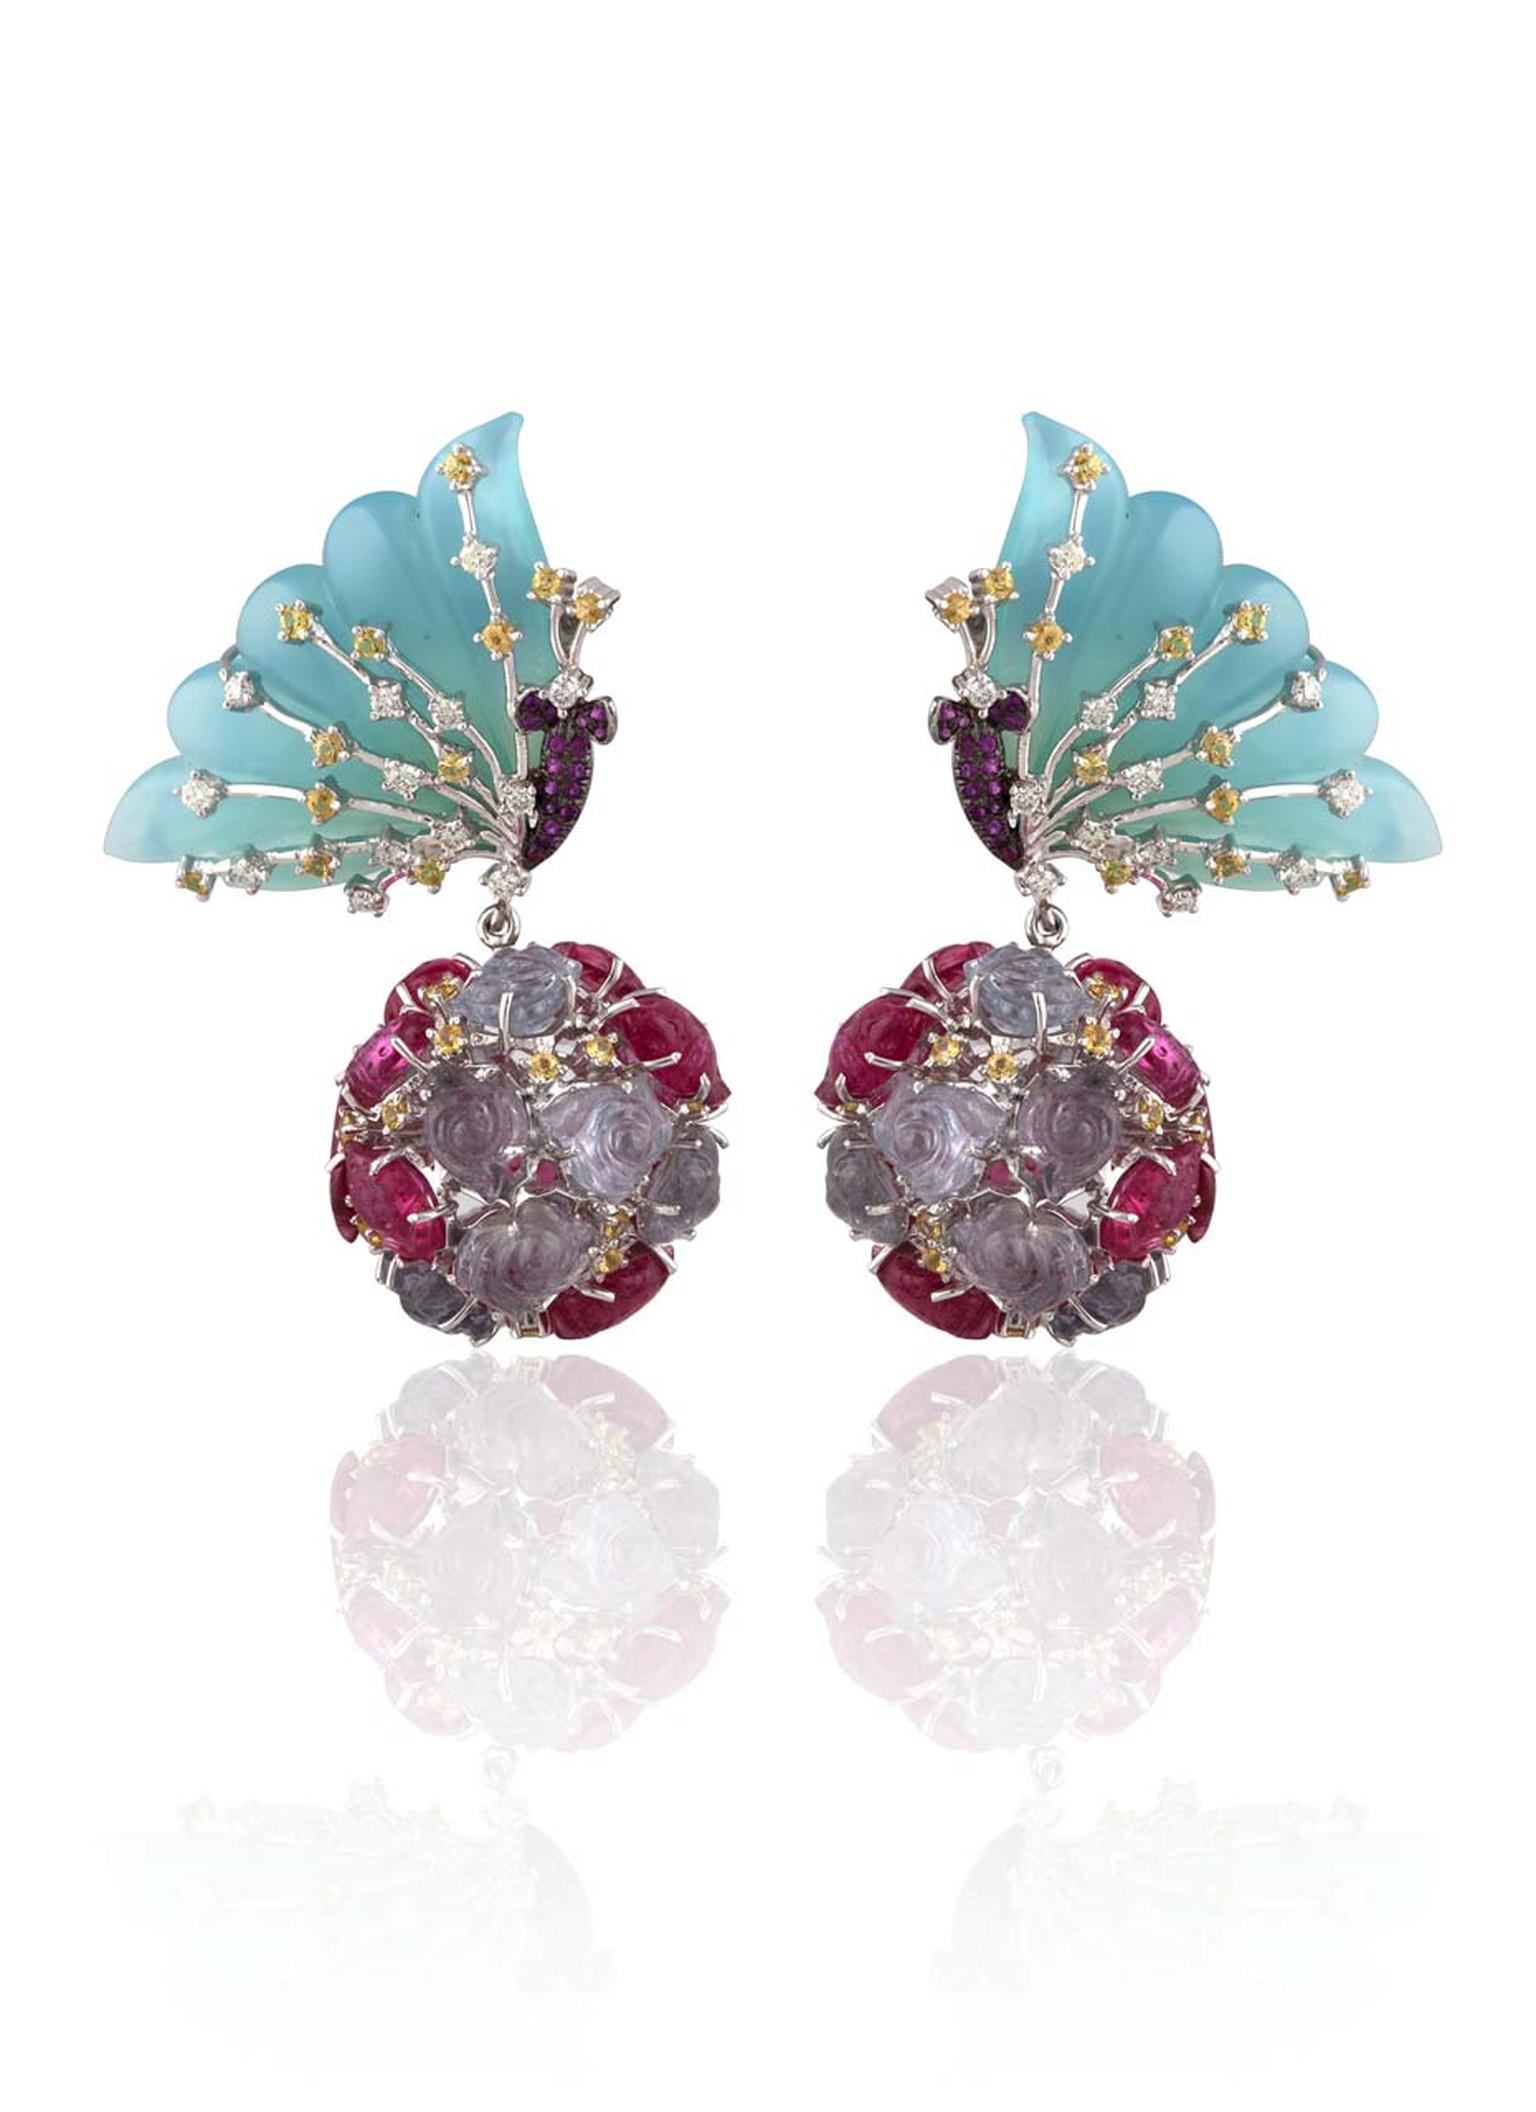 Mirari Butterfly drop earrings with carved blue onyx wings, tourmaline flower spheres, yellow sapphires and diamonds.